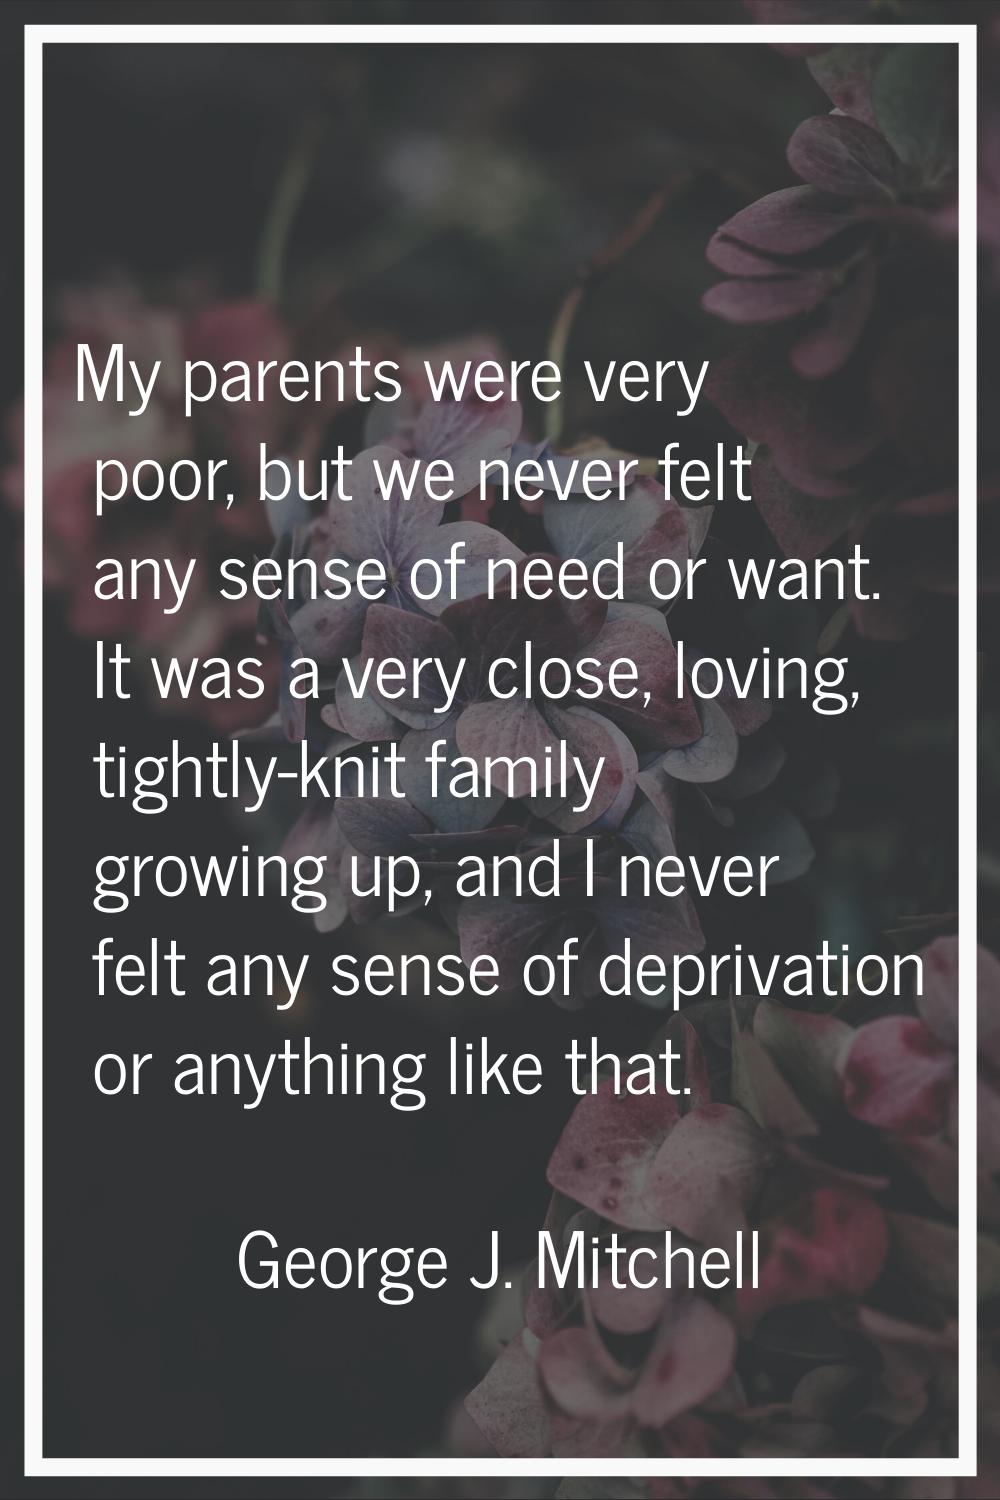 My parents were very poor, but we never felt any sense of need or want. It was a very close, loving